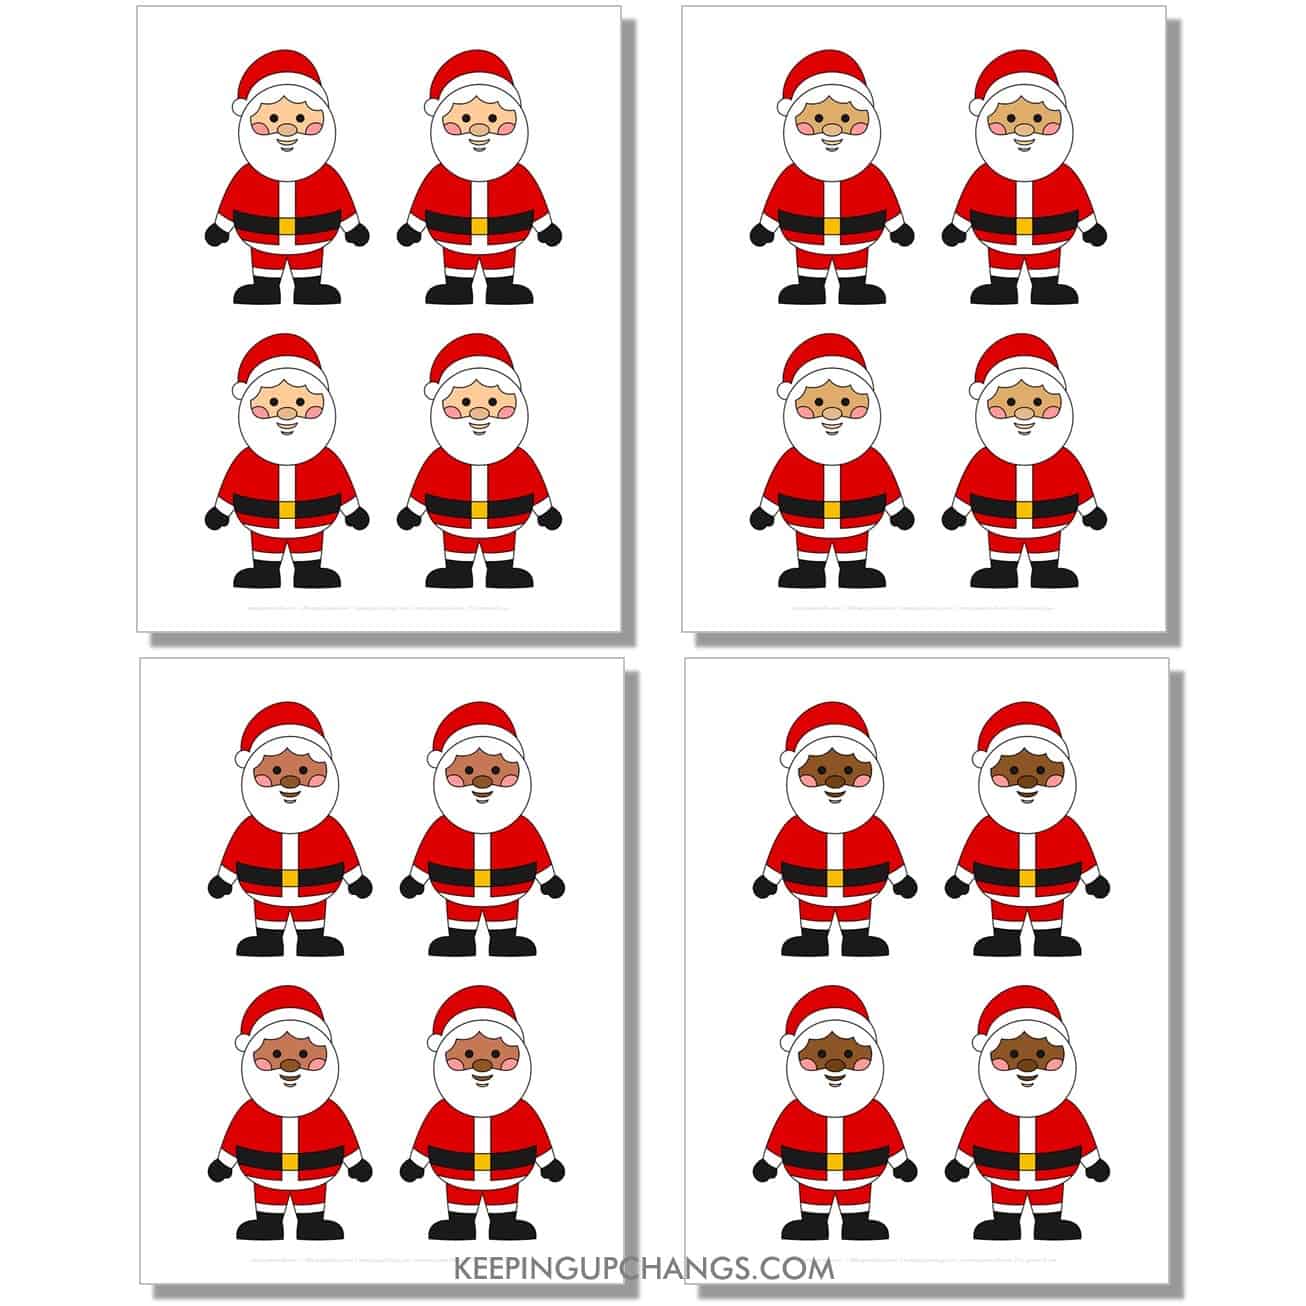 free medium standing santa outline, cut out template in color, red, black, white for light, medium, dark skin tones, races.